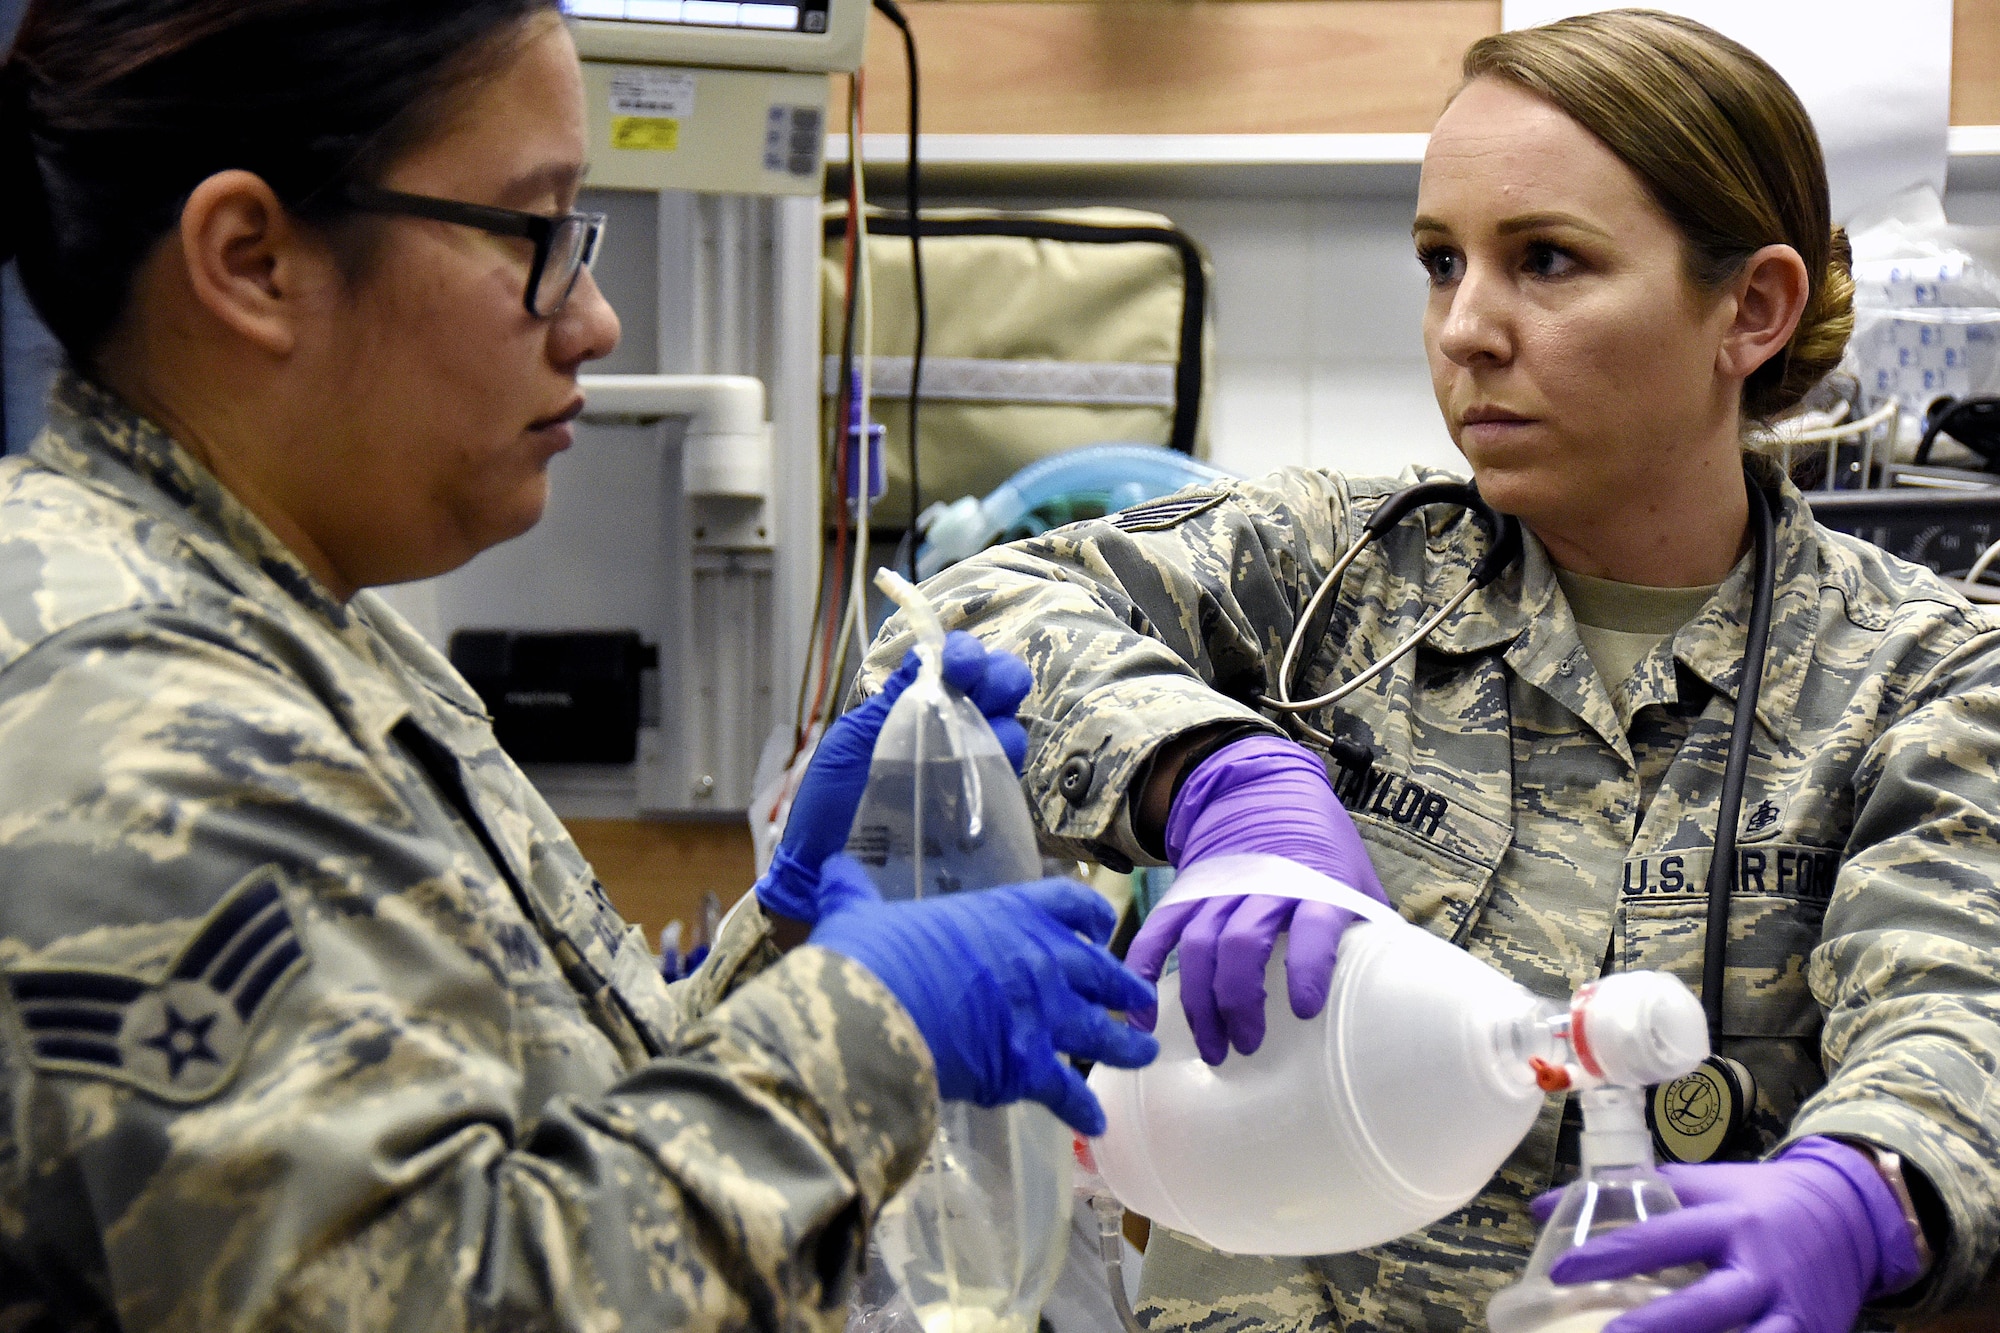 U.S. Air Force Staff Sgt. Samantha Taylor, an aerospace medical technician, right, squeezes a bag mask ventilator as U.S. Air Force Senior Airman Shaina Kelnhoser, a flight medicine technician, both with the with the 379th Expeditionary Medical Group holds an IV bag during a Lifeflight medical trauma exercise at Al Udeid Air Base, Qatar, March 22, 2017. The exercise was held to practice the process of extracting a patient from a vehicle accident, followed by stabilizing and evacuating the patient via aircraft. (U.S. Air Force photo by Senior Airman Cynthia A. Innocenti)